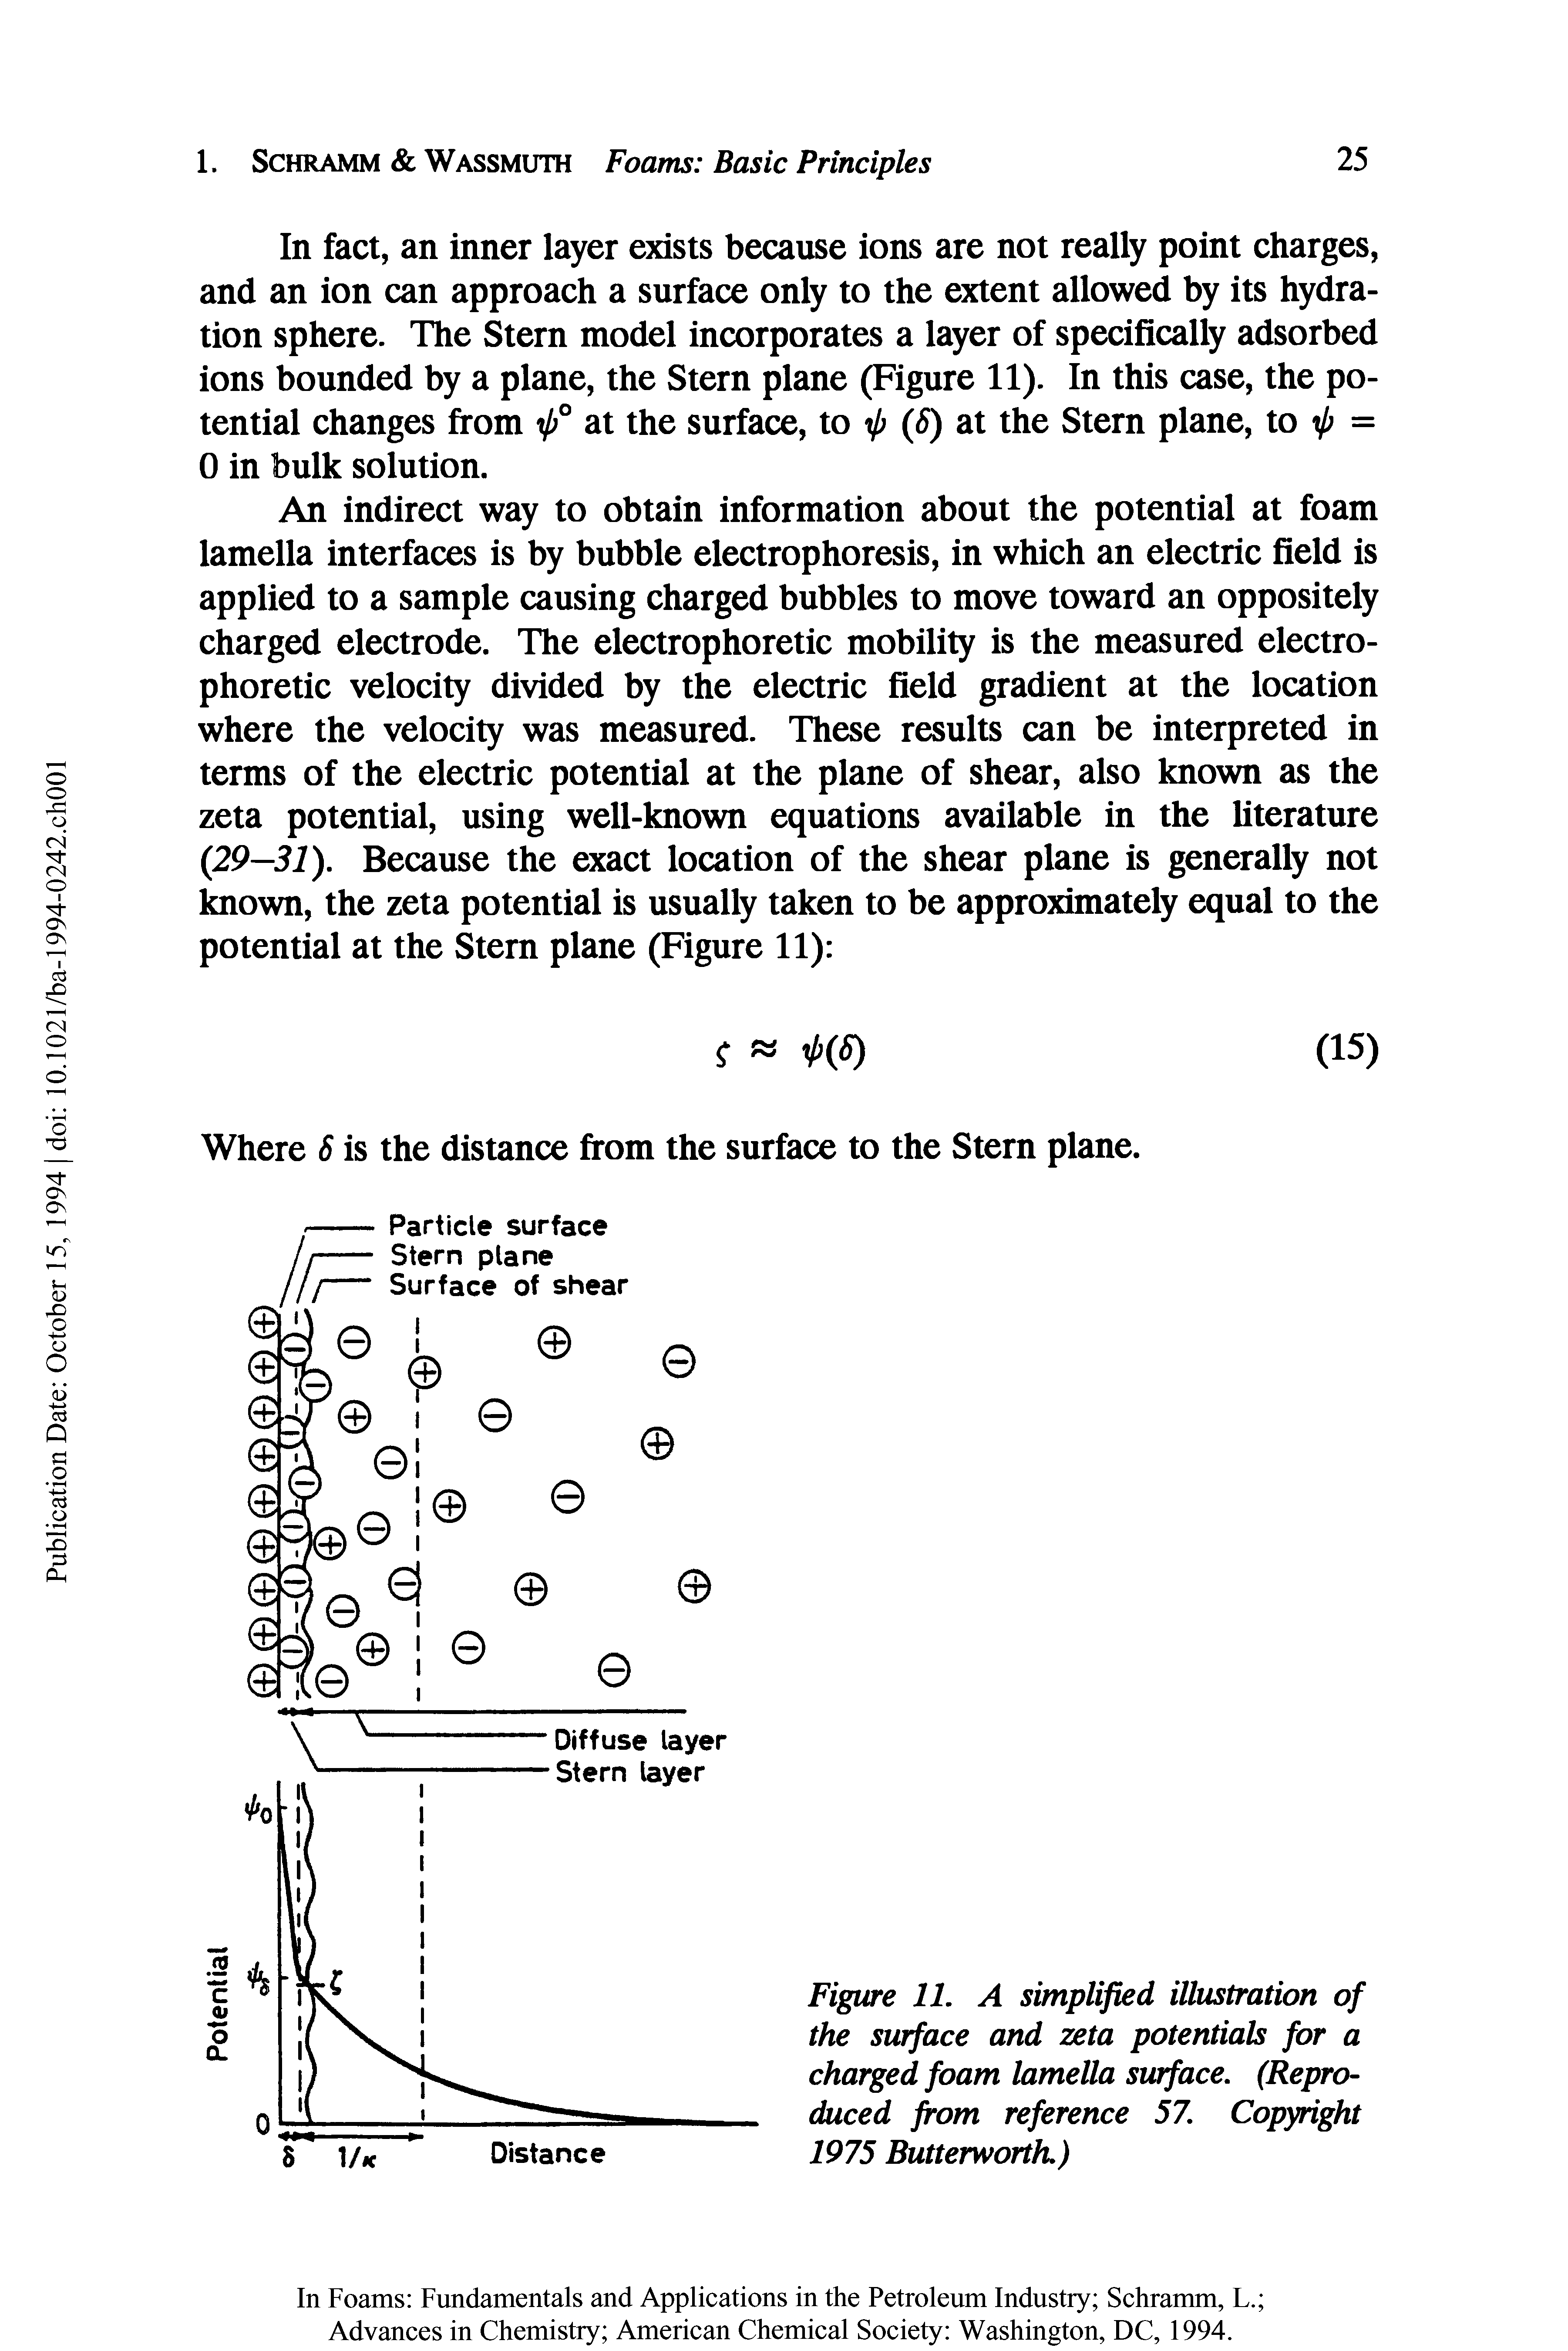 Figure 11. A simplified illustration of the surface and zeta potentials for a charged foam lamella surface. (Reproduced from reference 57. Copyright 1975 Butterworth.)...